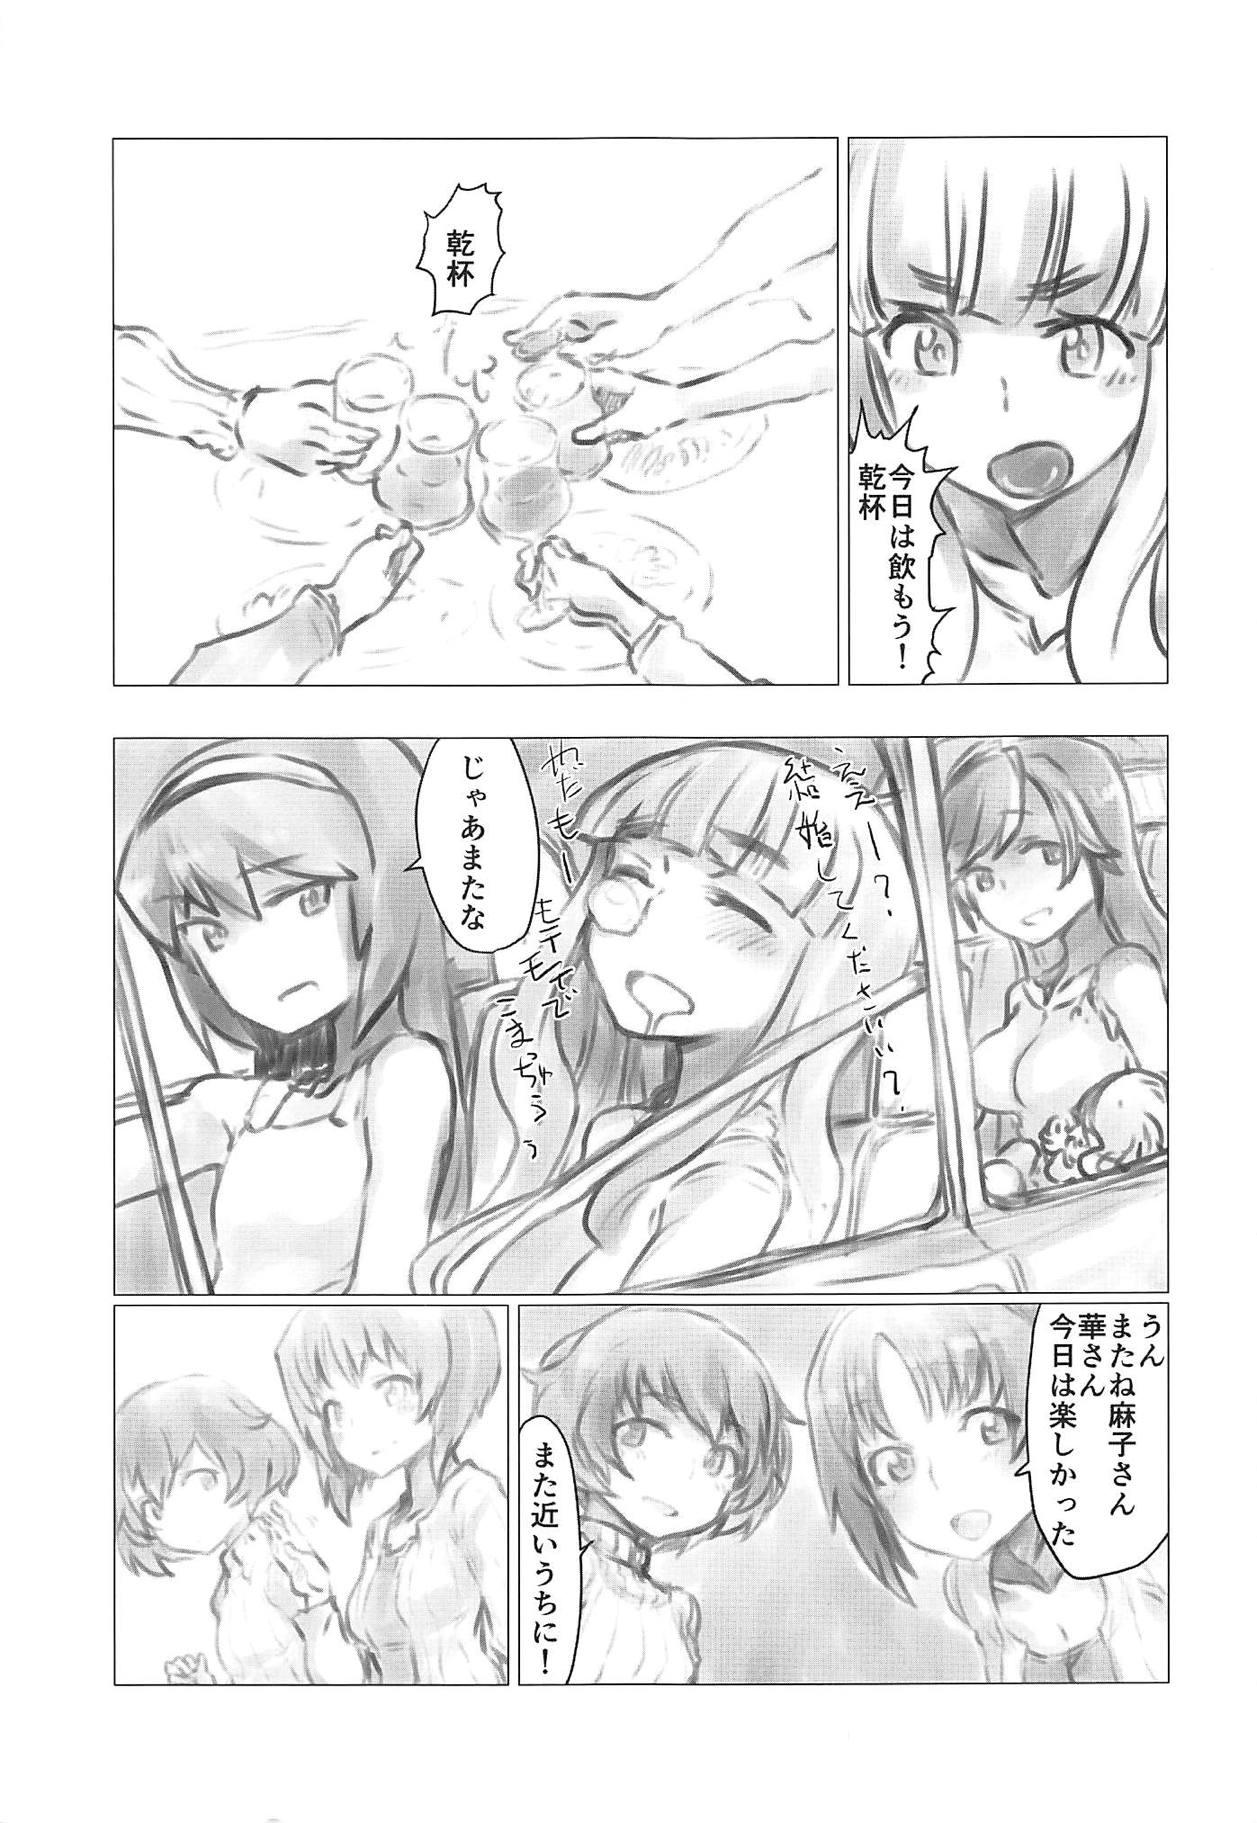 Wet THE DOG MAY STAND THE STRONG INSTEAD - Girls und panzer Sex Tape - Page 4